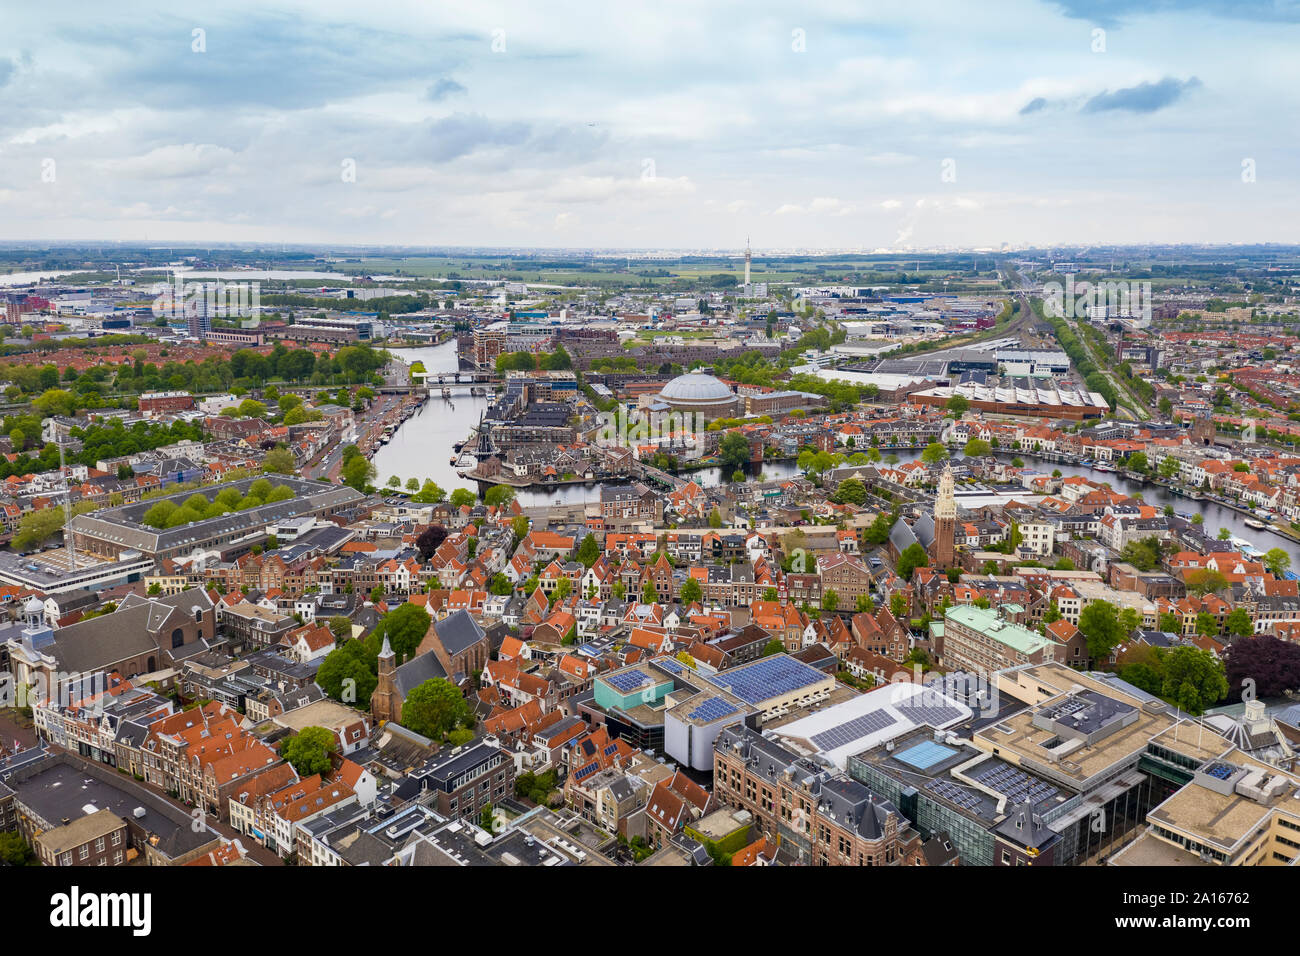 Aerial view of Haarlem city against cloudy sky Stock Photo